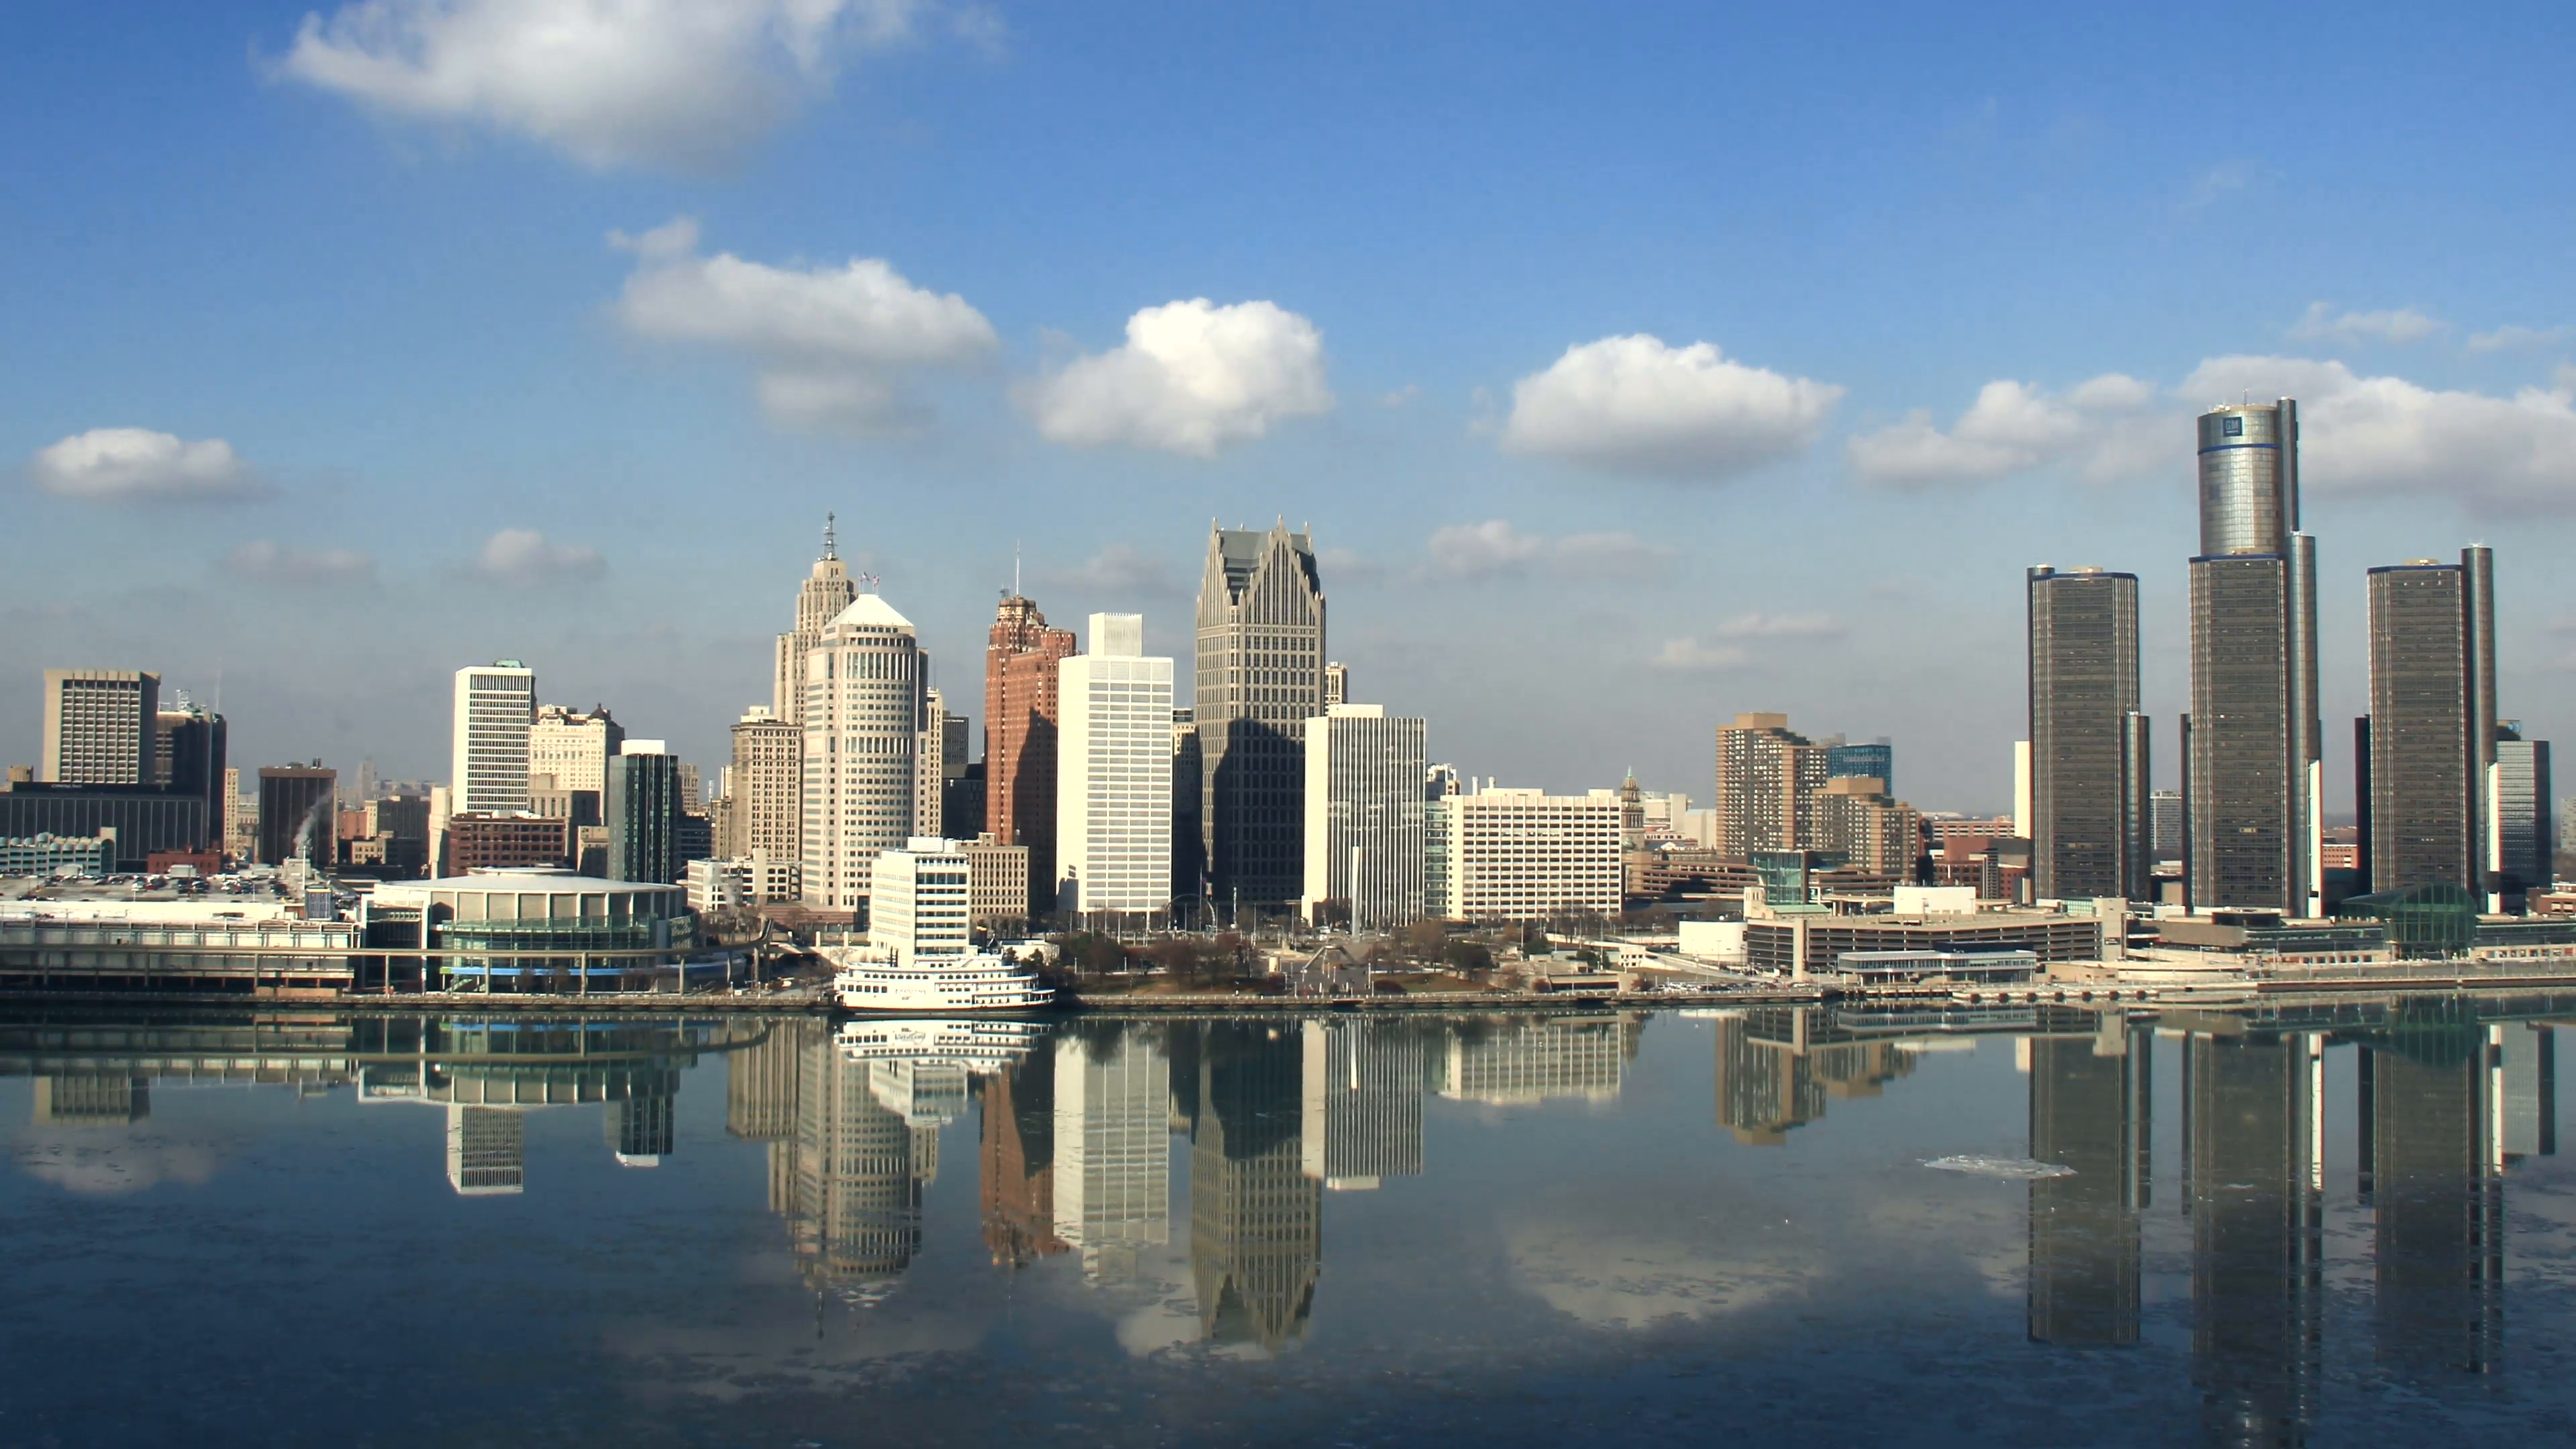 Detroit Skyline Afternoon Time Lapse 1. Detroit city skyline during ...